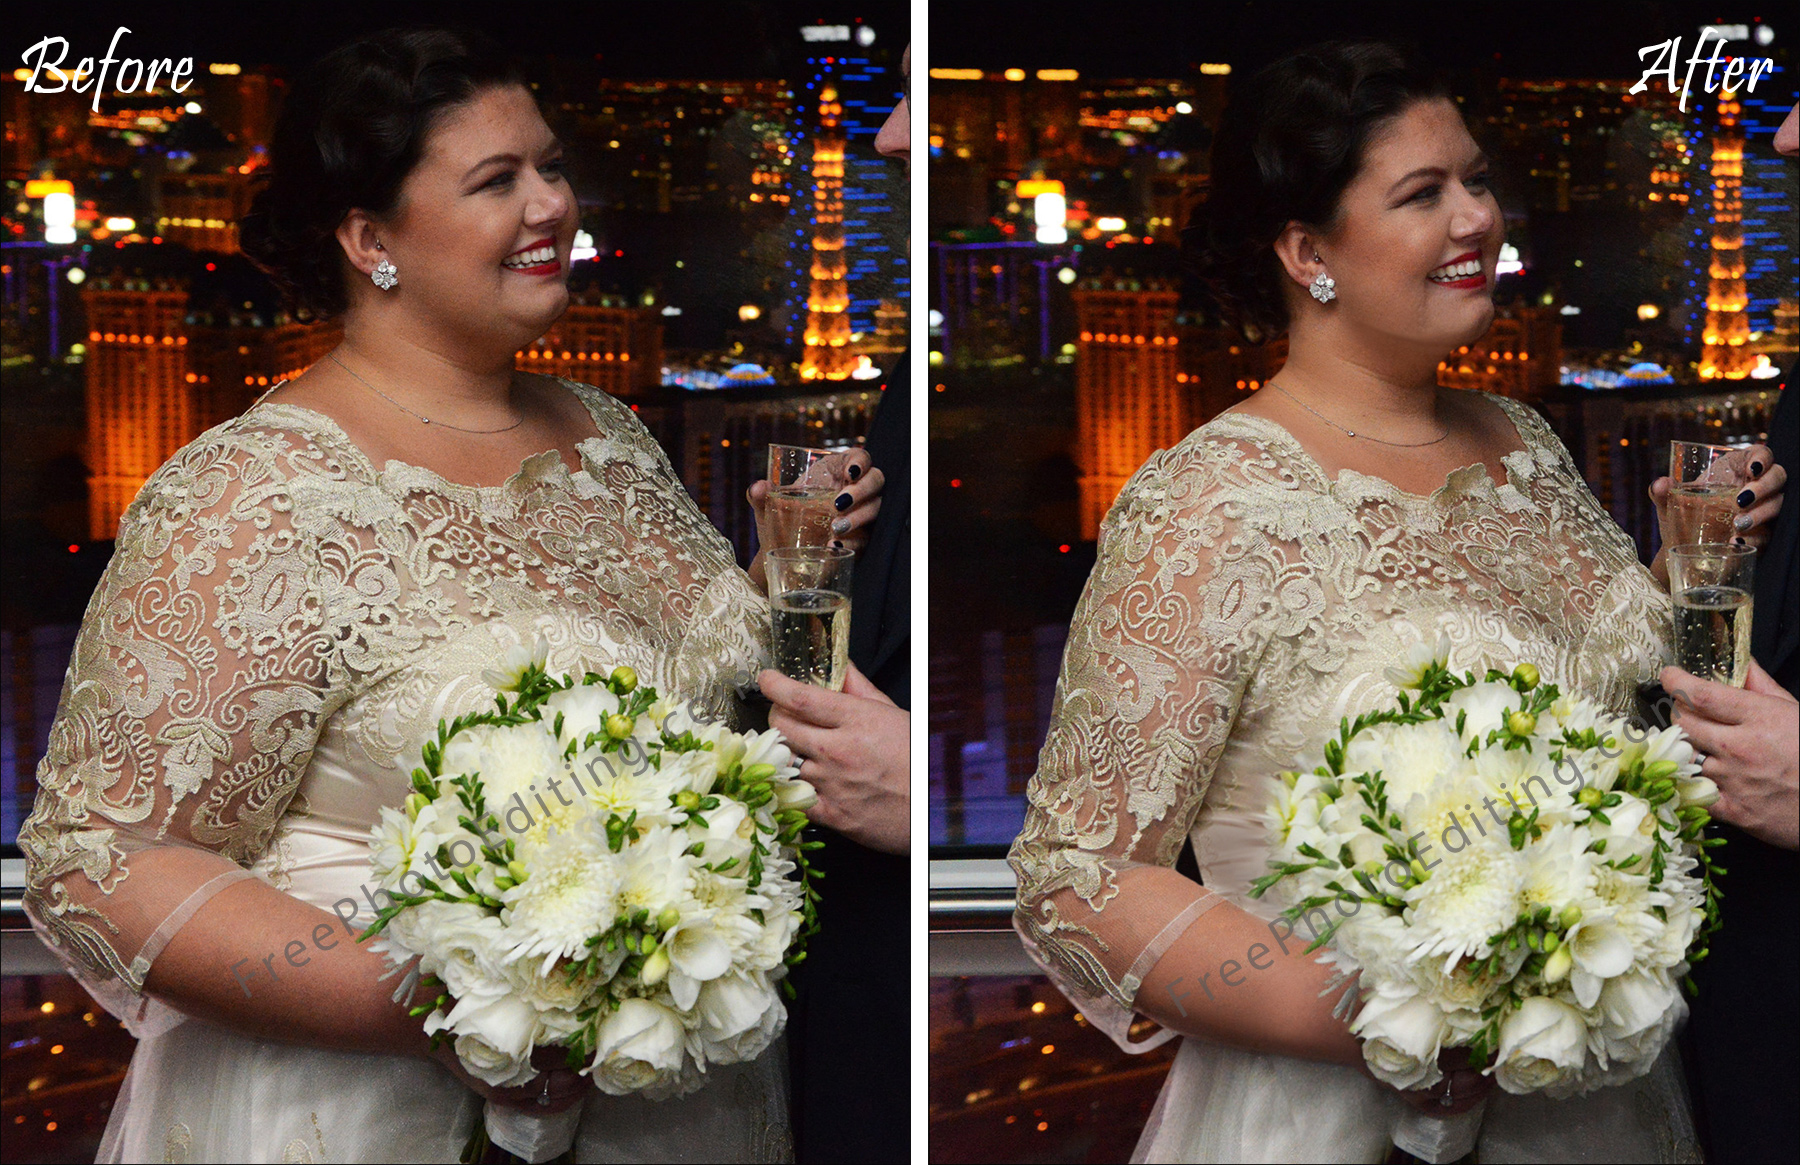 Overweight bride looks thinner in bridal photos